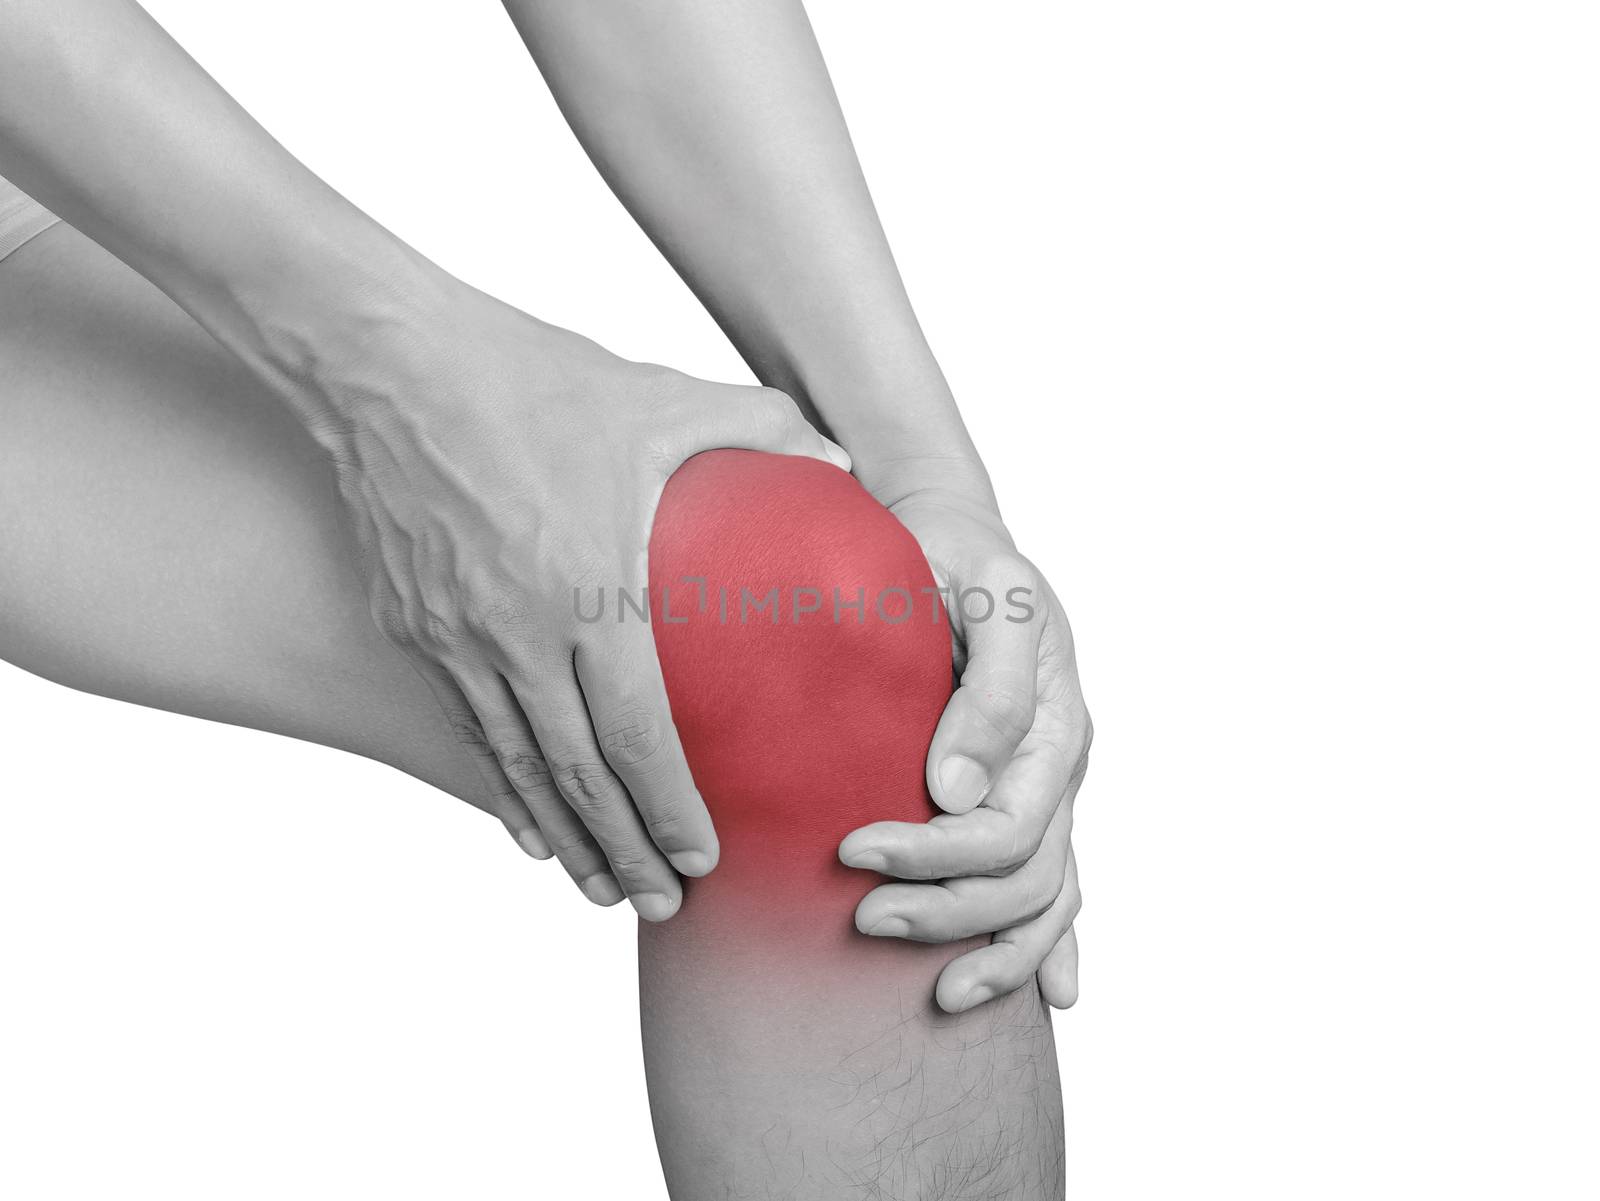 man suffering from knee pain, joint pains. mono tone highlight at knee isolated on white background. health care and medical concept by asiandelight